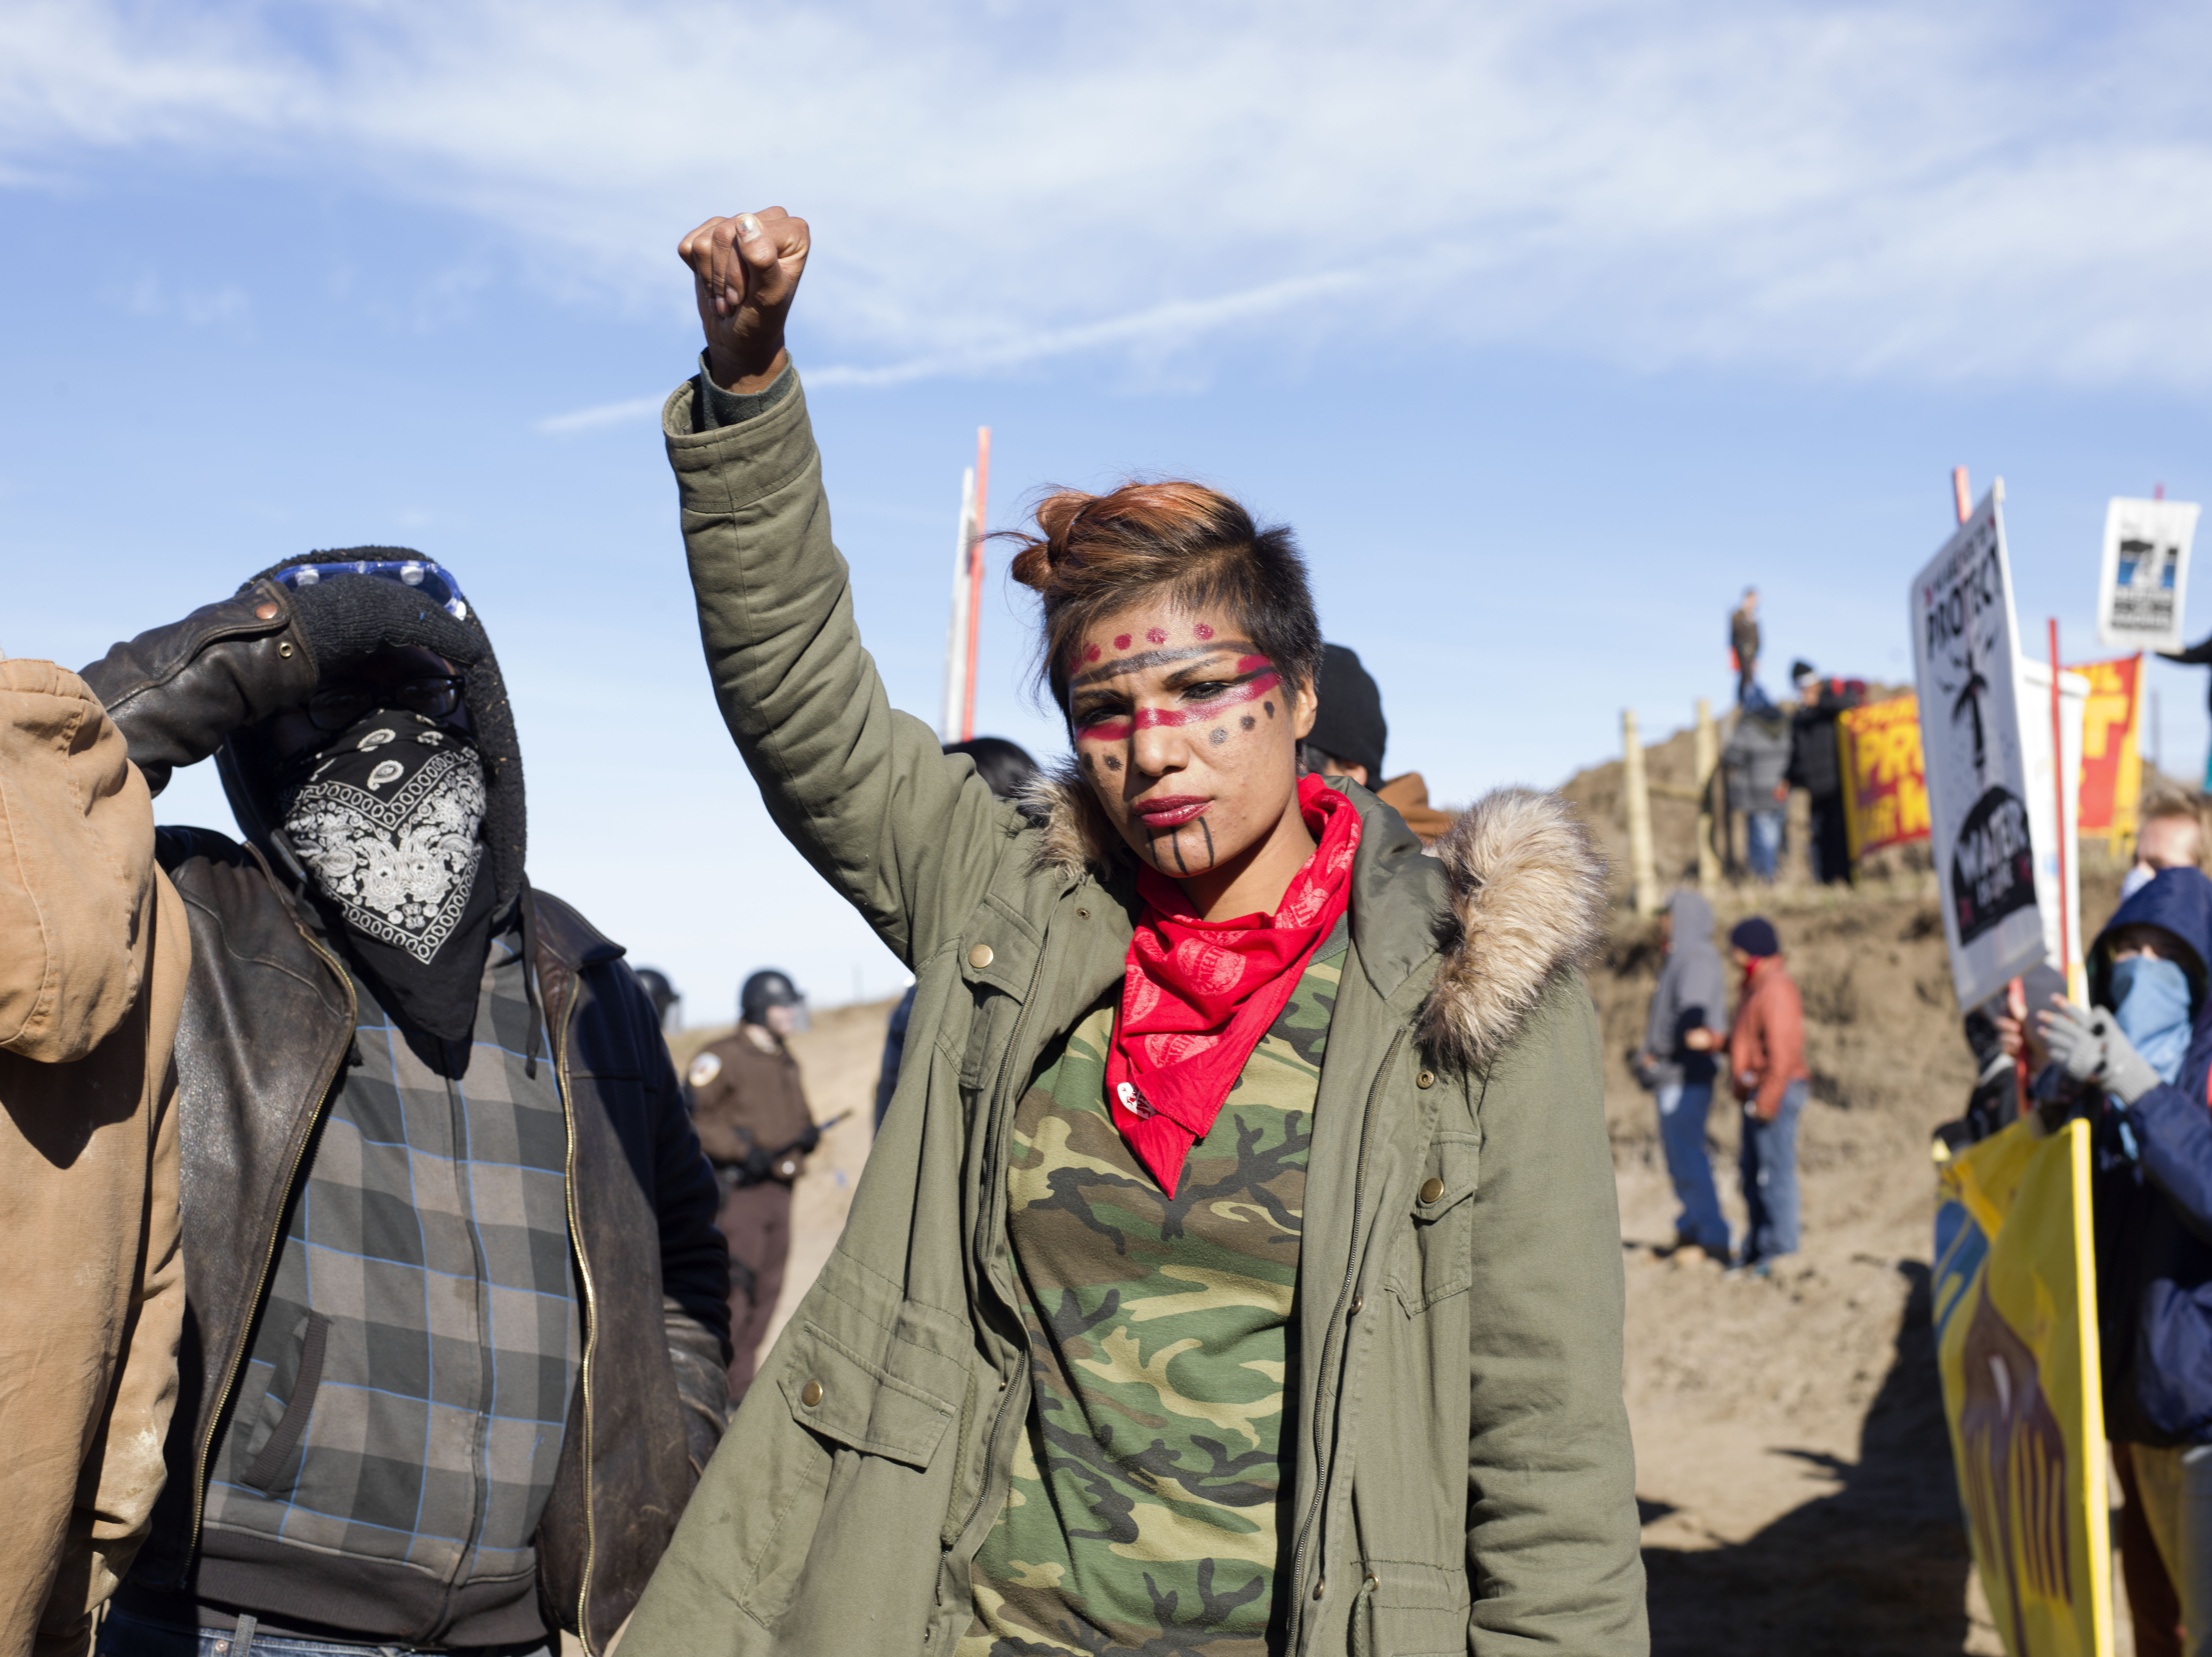 Portraits of Protest: The Women of Standing Rock • Alessandra Sanguinetti • Magnum Photos